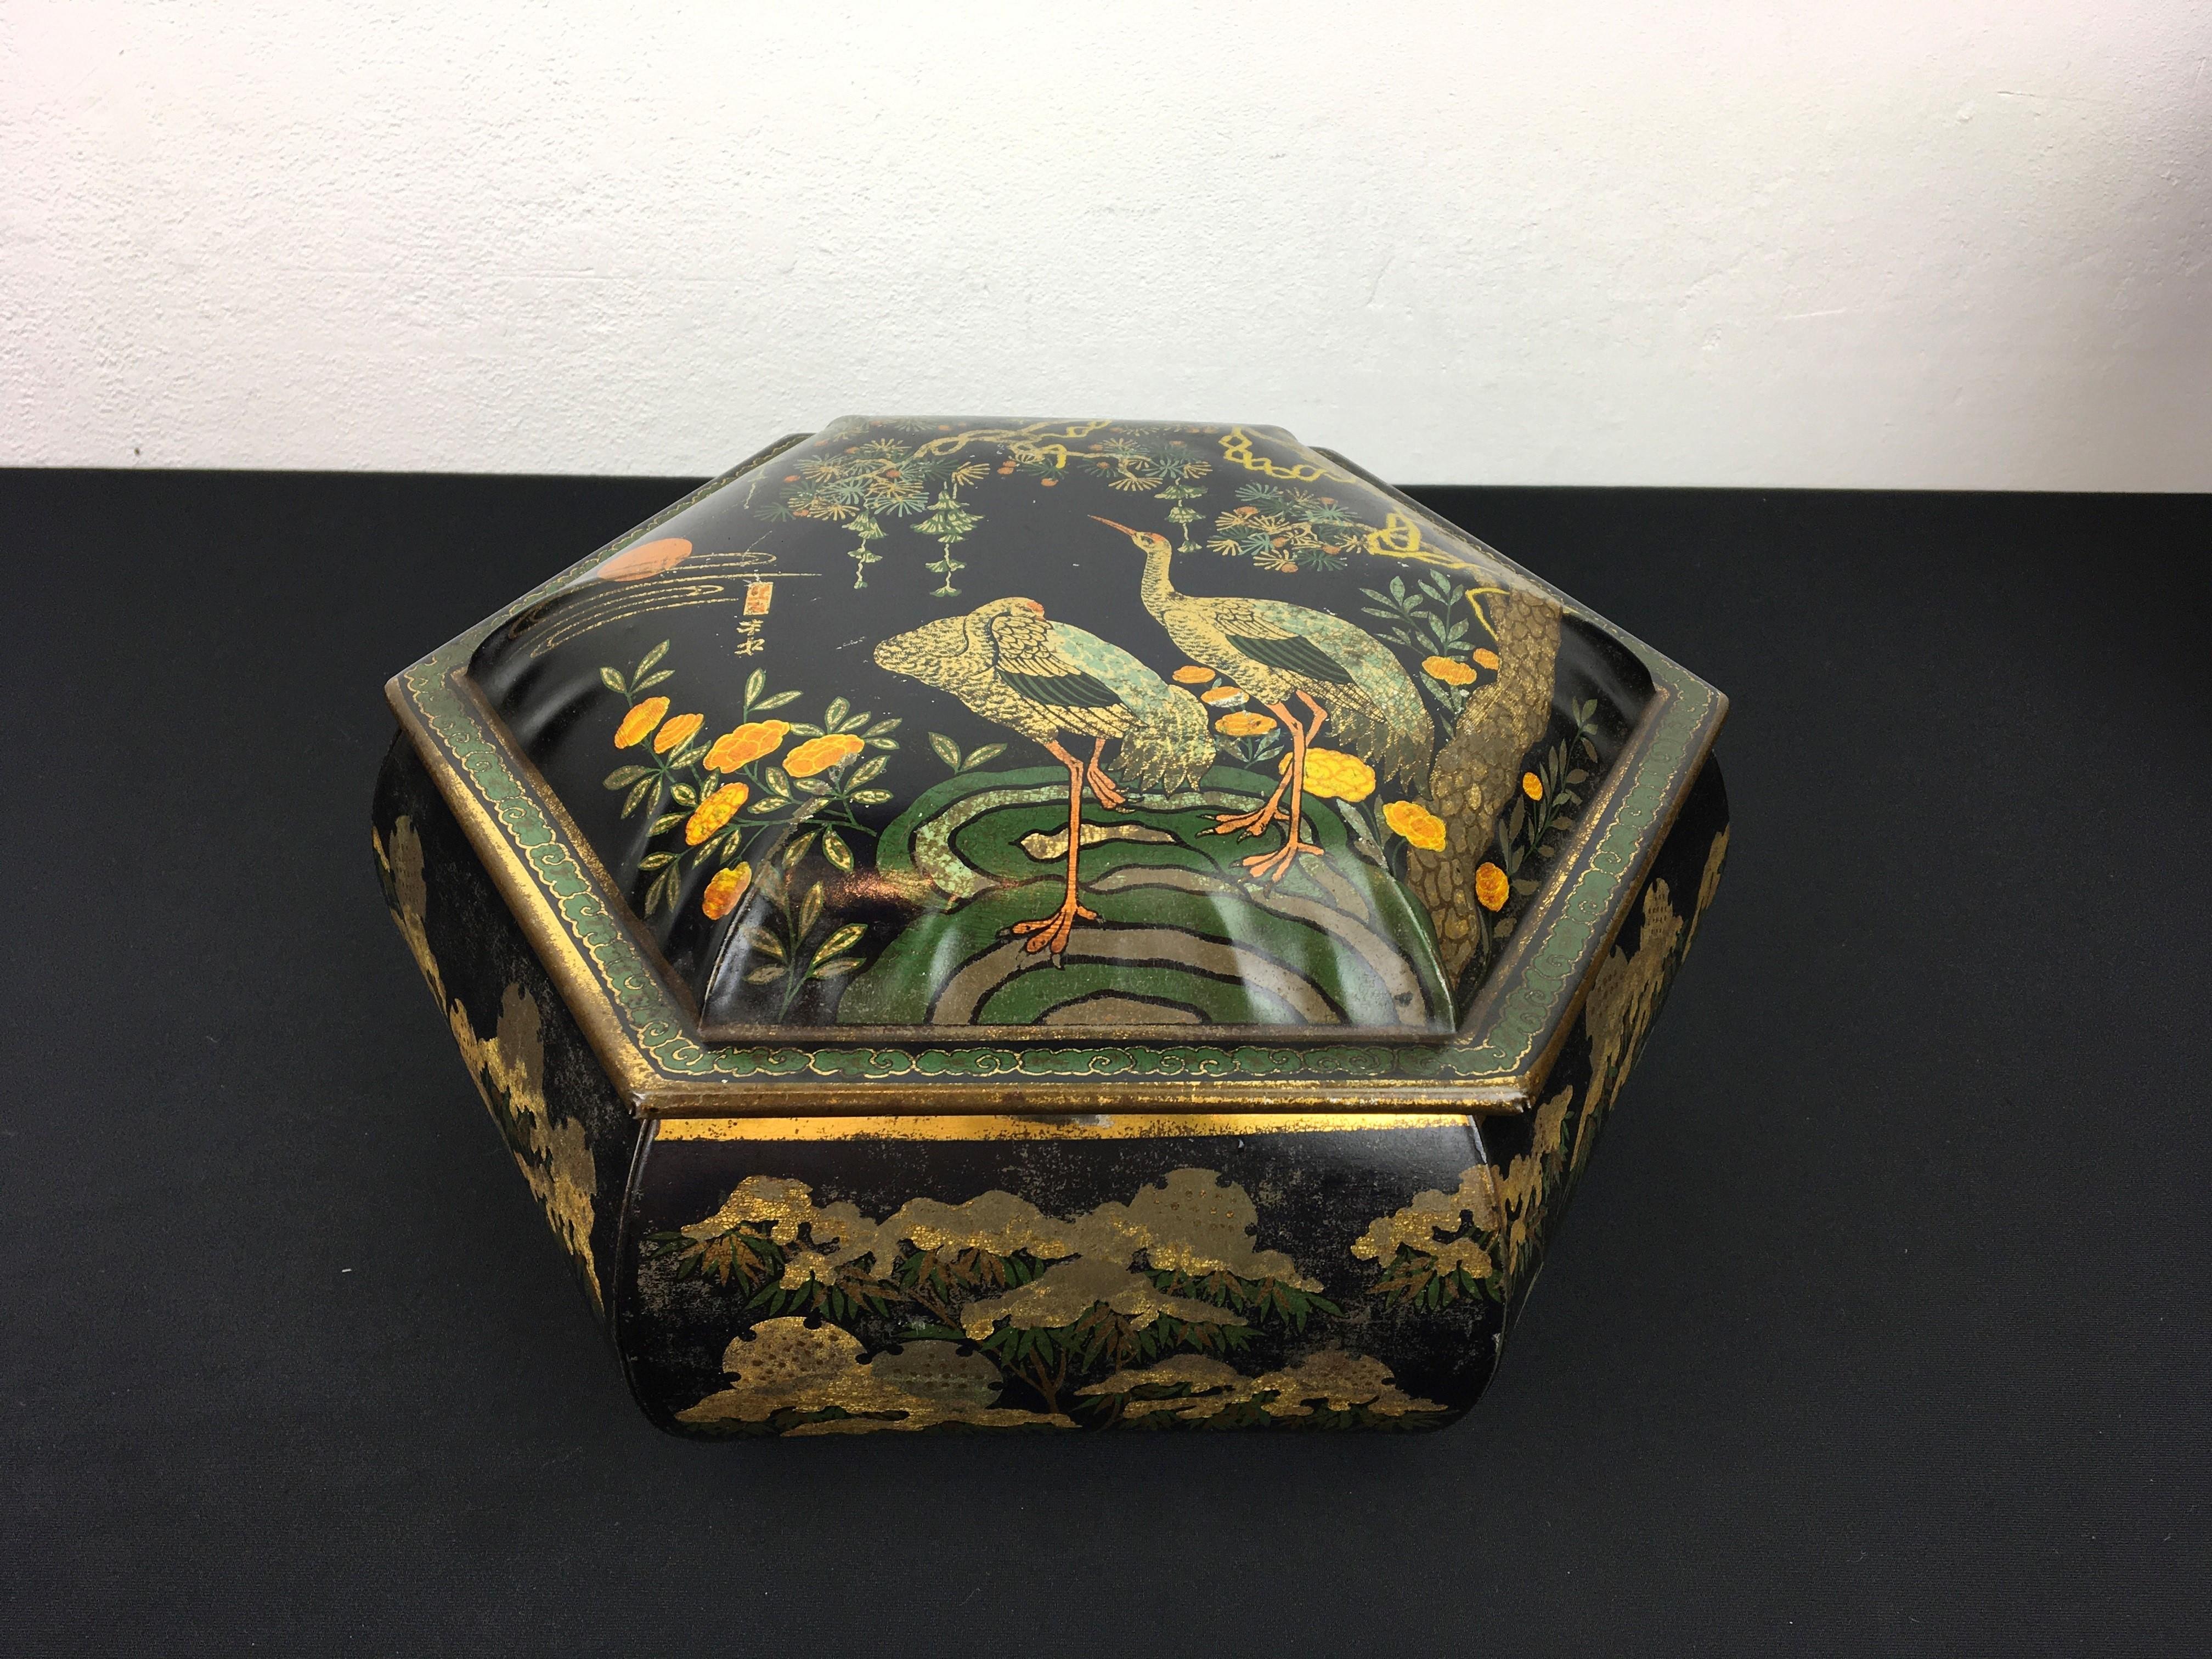 European Antique Tin with Cranes Asian Style, Early 20th Century